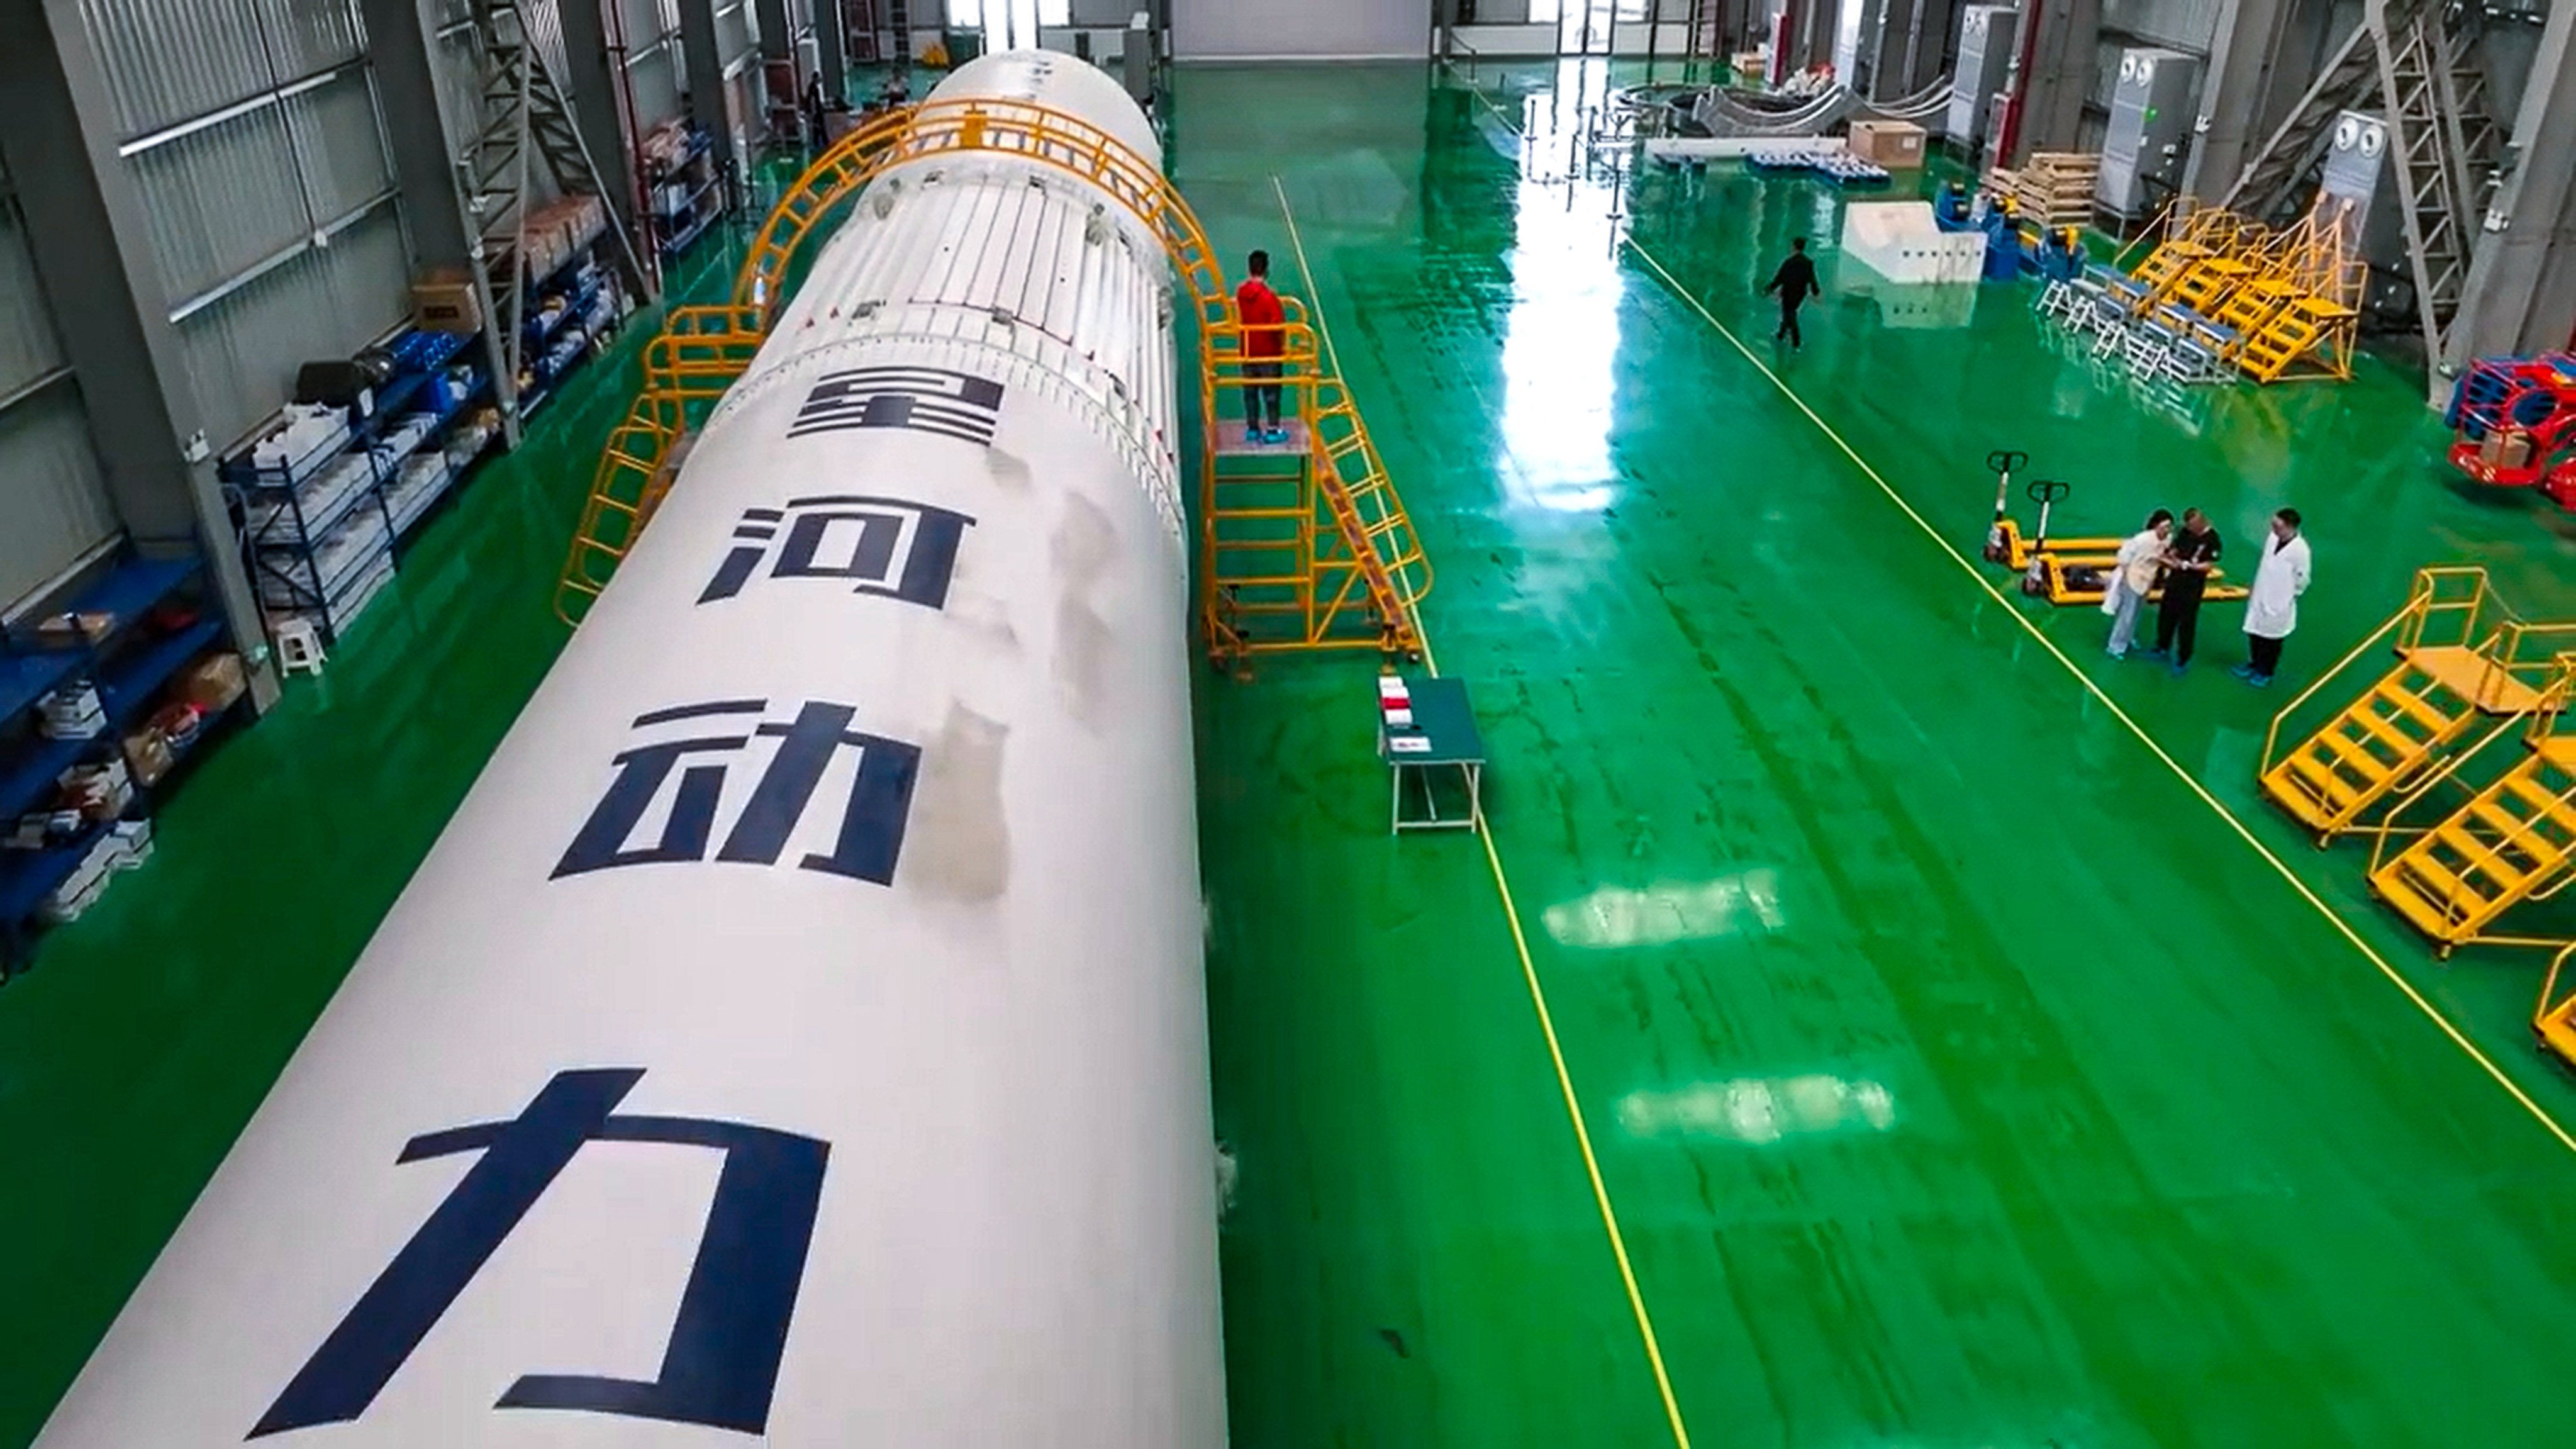 Pallas-1 is a 49-metre kerosene-liquid oxygen rocket that is designed to be used up to 50 times. Photo: Weibo